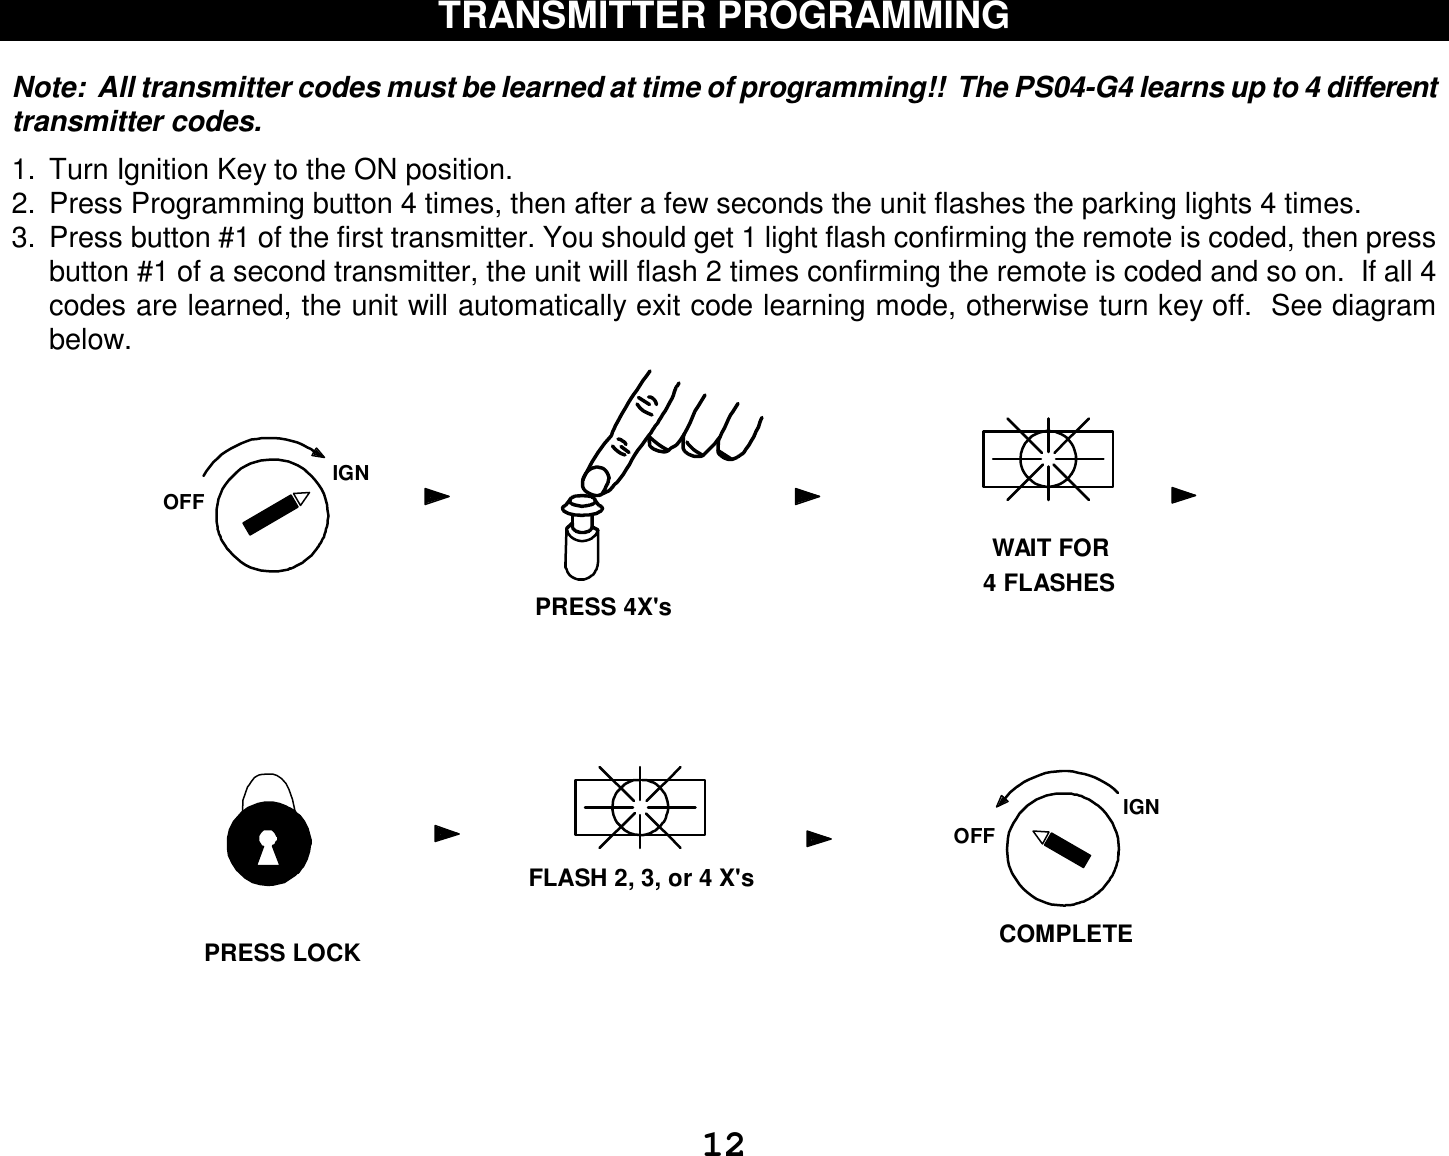  12 TRANSMITTER PROGRAMMING   Note:  All transmitter codes must be learned at time of programming!!  The PS04-G4 learns up to 4 different transmitter codes.    1. Turn Ignition Key to the ON position.  2. Press Programming button 4 times, then after a few seconds the unit flashes the parking lights 4 times. 3. Press button #1 of the first transmitter. You should get 1 light flash confirming the remote is coded, then press button #1 of a second transmitter, the unit will flash 2 times confirming the remote is coded and so on.  If all 4 codes are learned, the unit will automatically exit code learning mode, otherwise turn key off.  See diagram below.                        IGNOFFWAIT FOR4 FLASHESPRESS 4X&apos;sFLASH 2, 3, or 4 X&apos;sIGNOFFCOMPLETEPRESS LOCK   